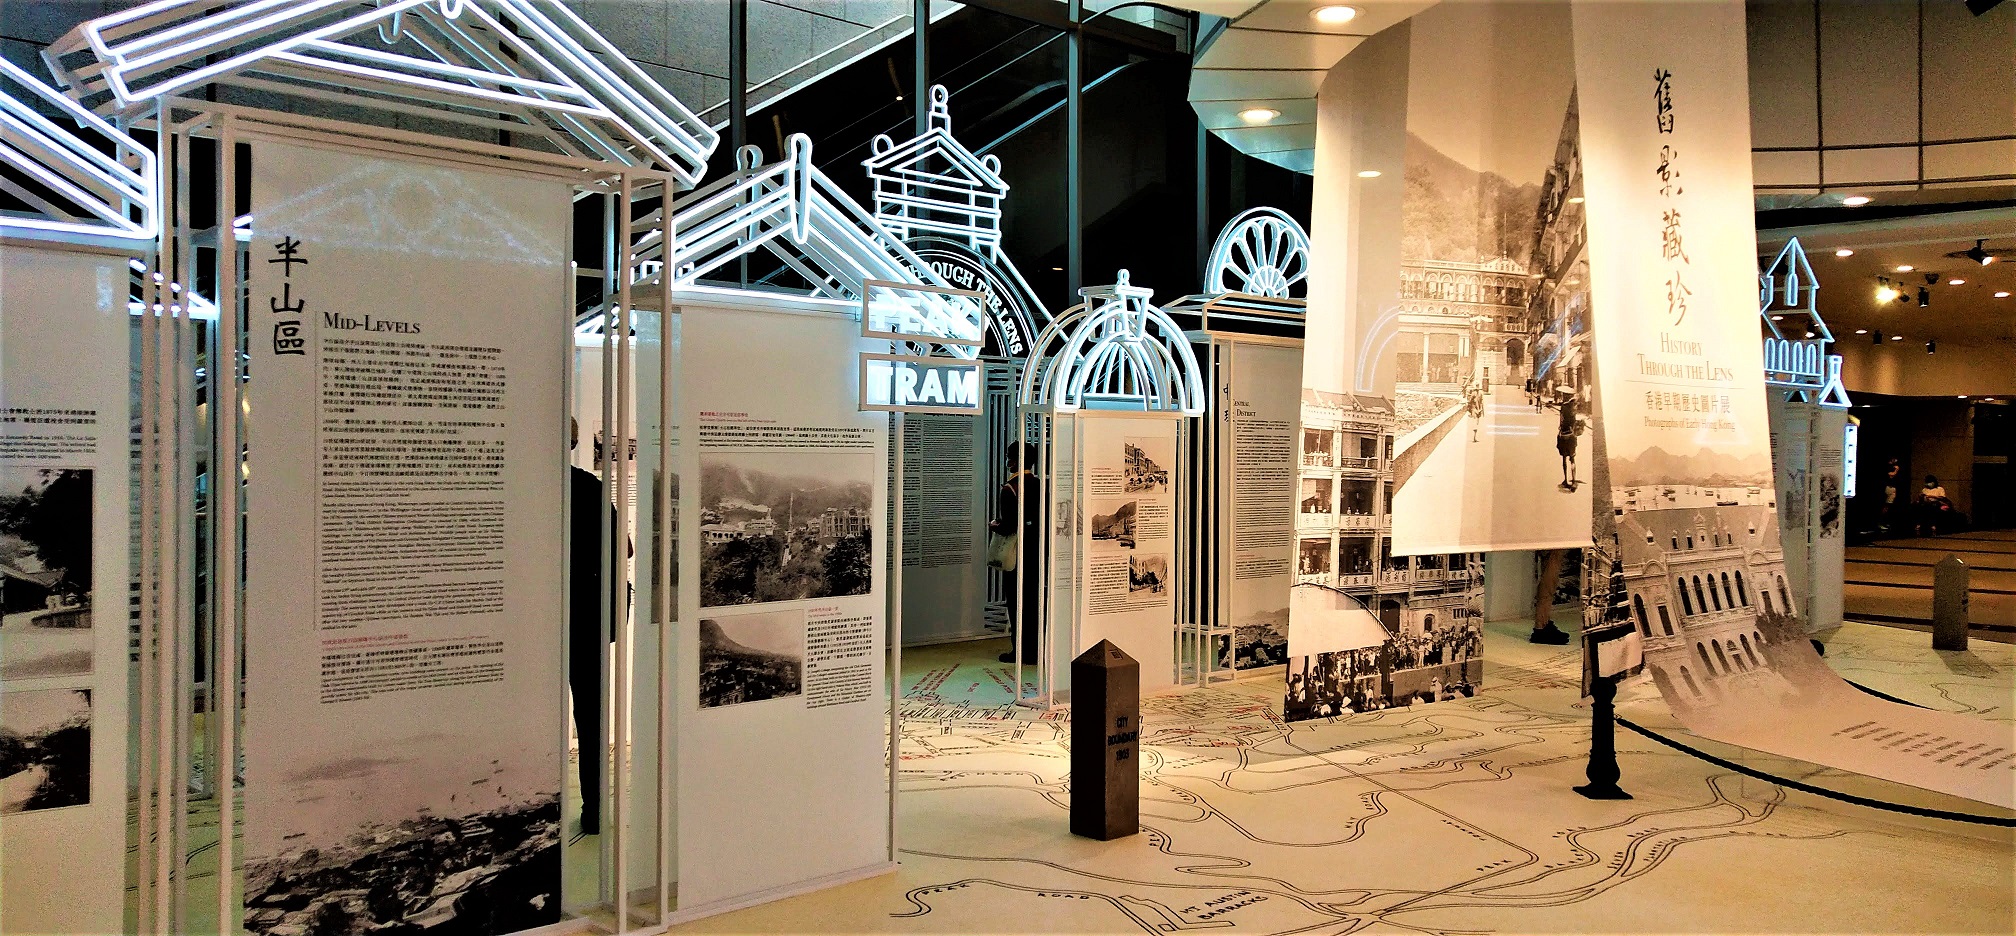 The old photo exhibition is at the lobby of Hong Kong Museum of History